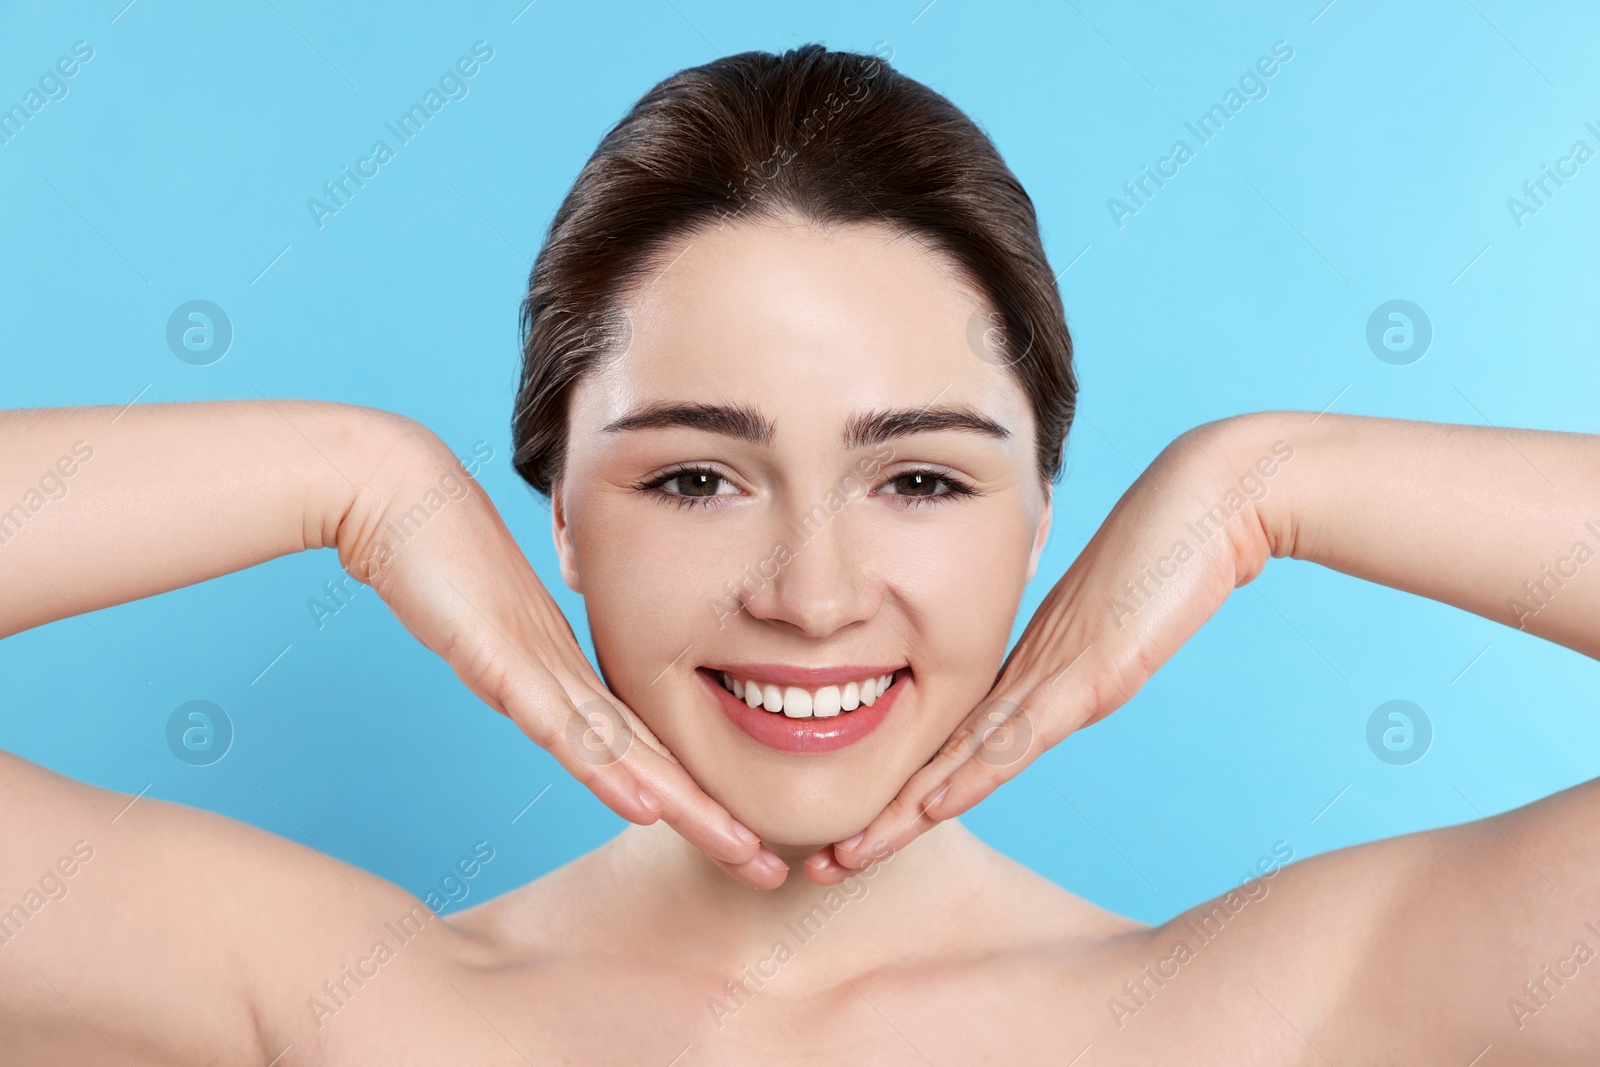 Photo of Young woman massaging her face on turquoise background